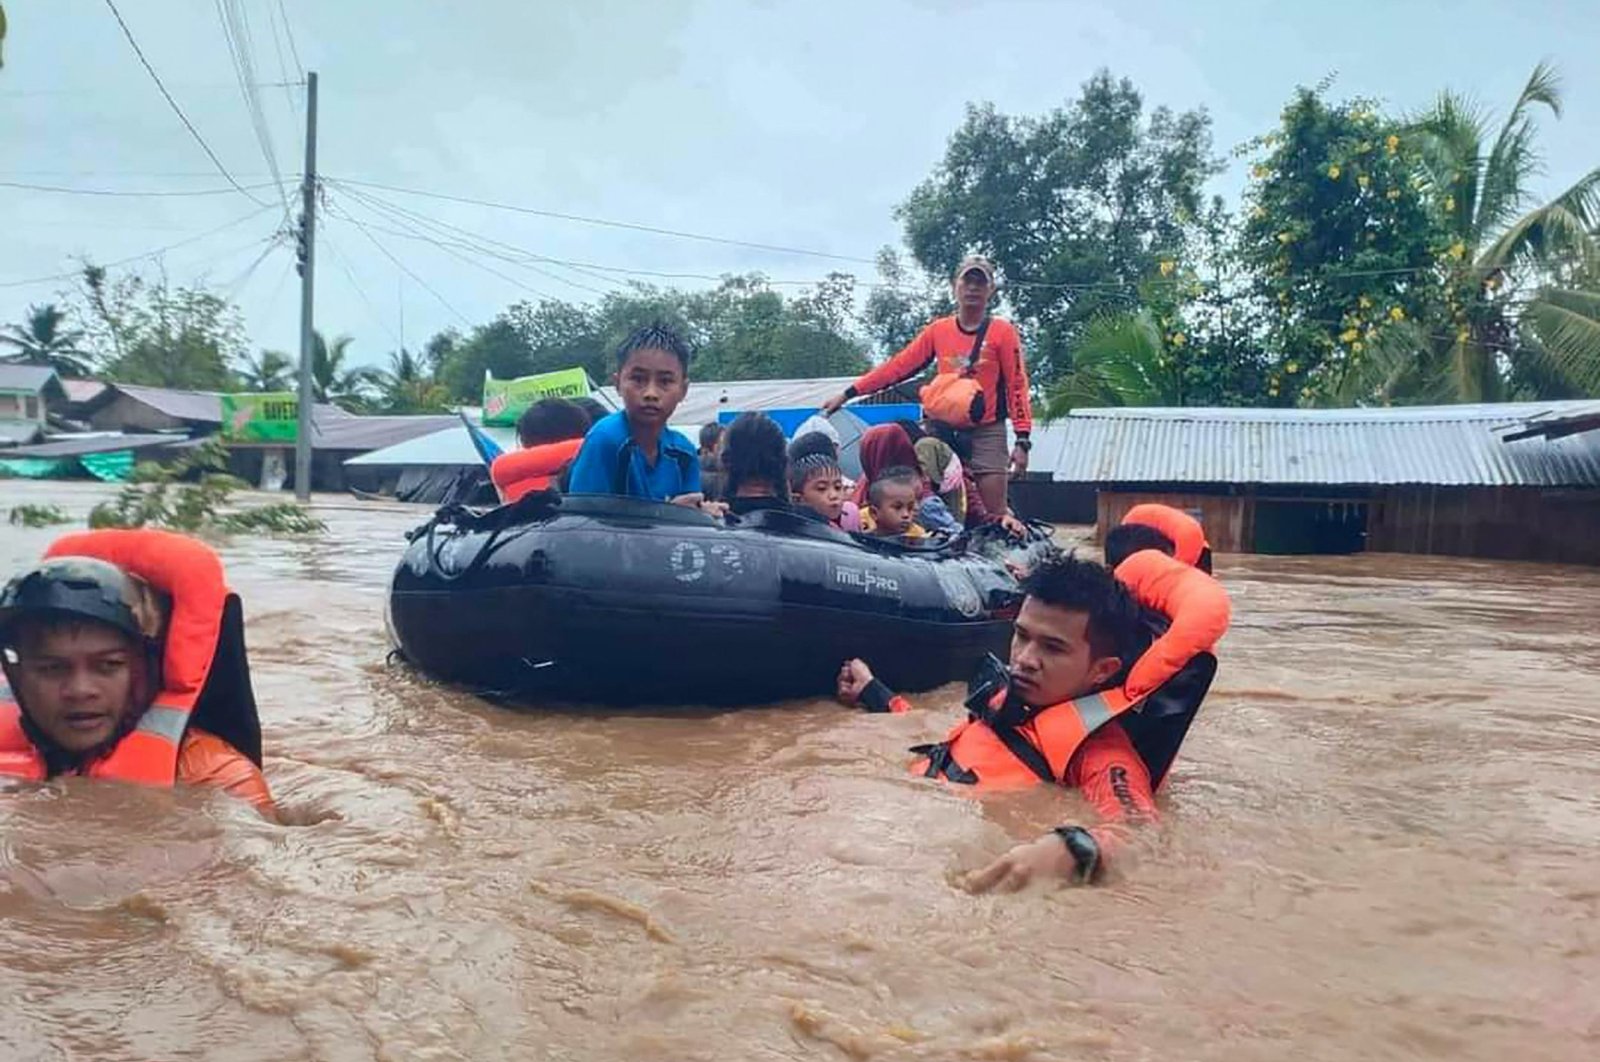 Rescue workers evacuating people from a flooded area due to heavy rain brought by Tropical Storm Nalgae, Parang, Maguindanao province, Philippines, Oct. 28, 2022. (AFP Photo)